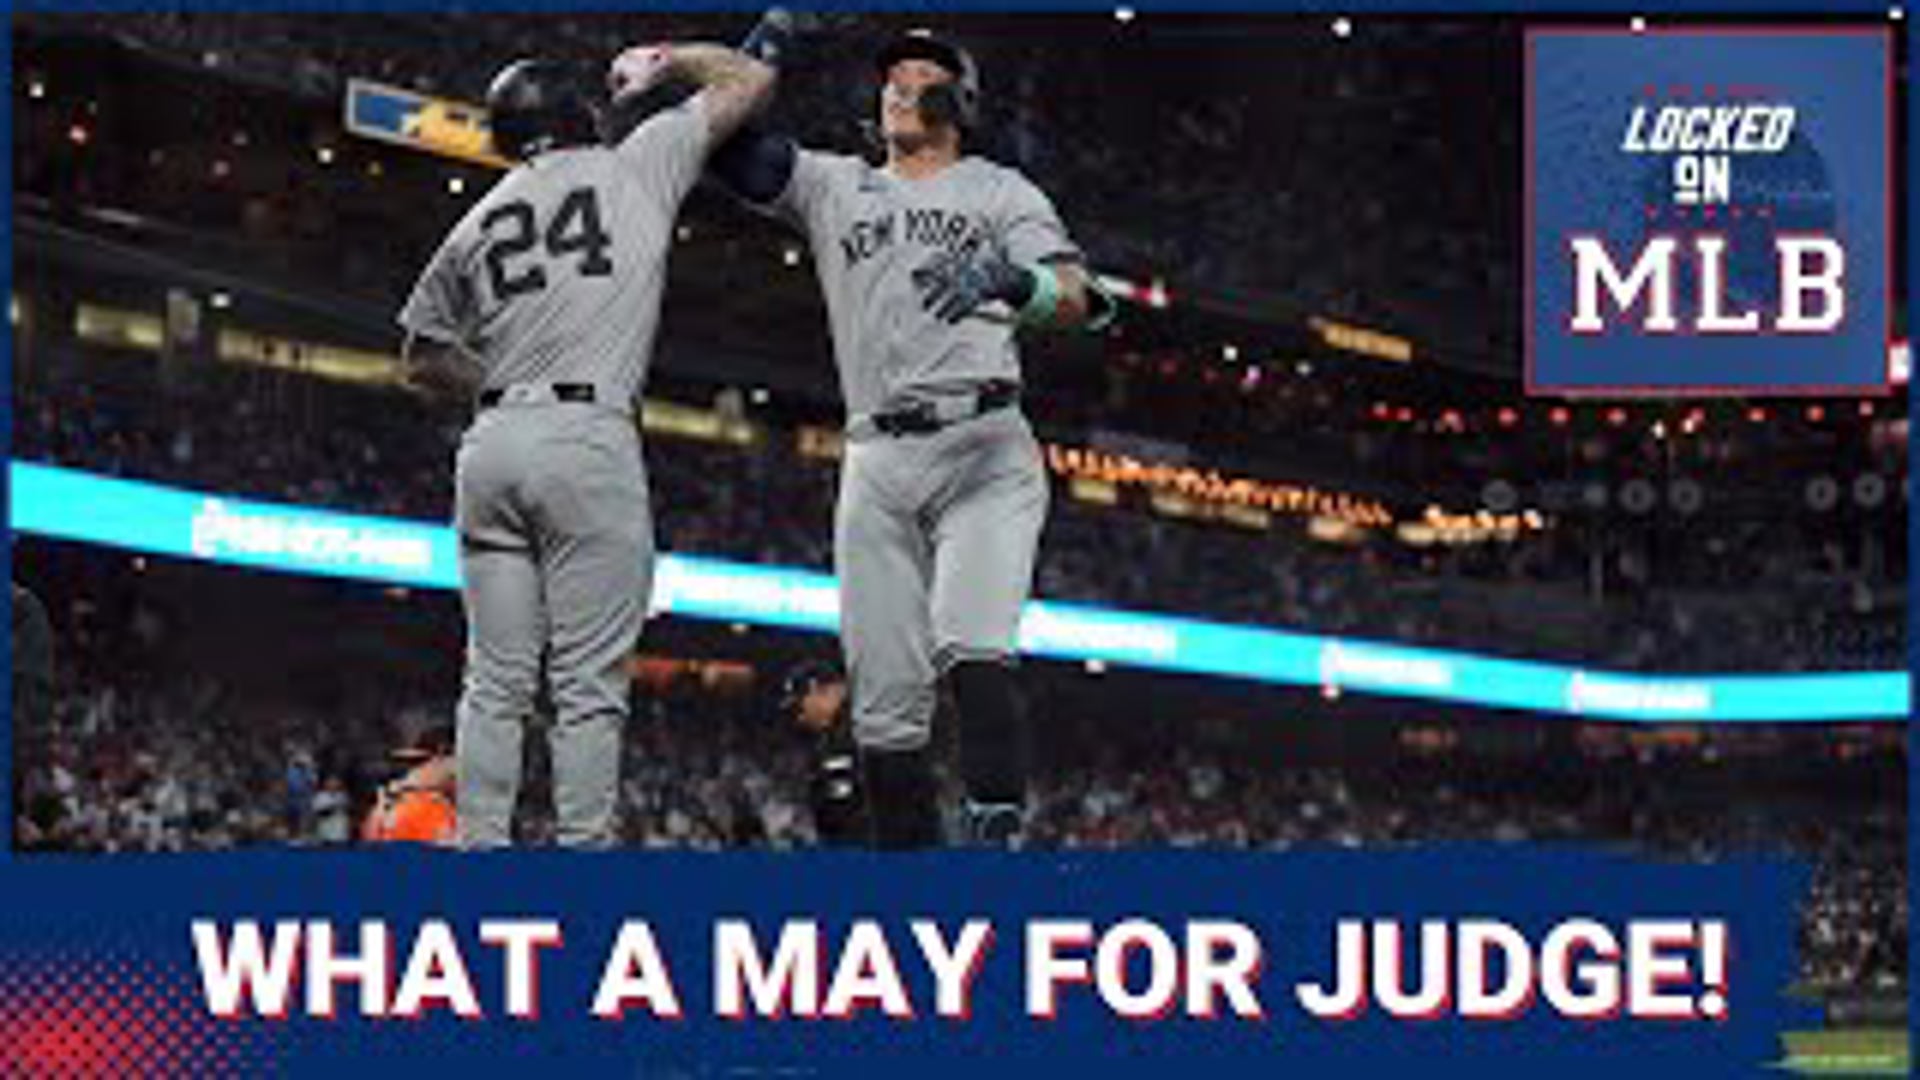 Aaron Judge removed all doubts about him with a dominant May. If he can take that into June, the Yankees could roll.